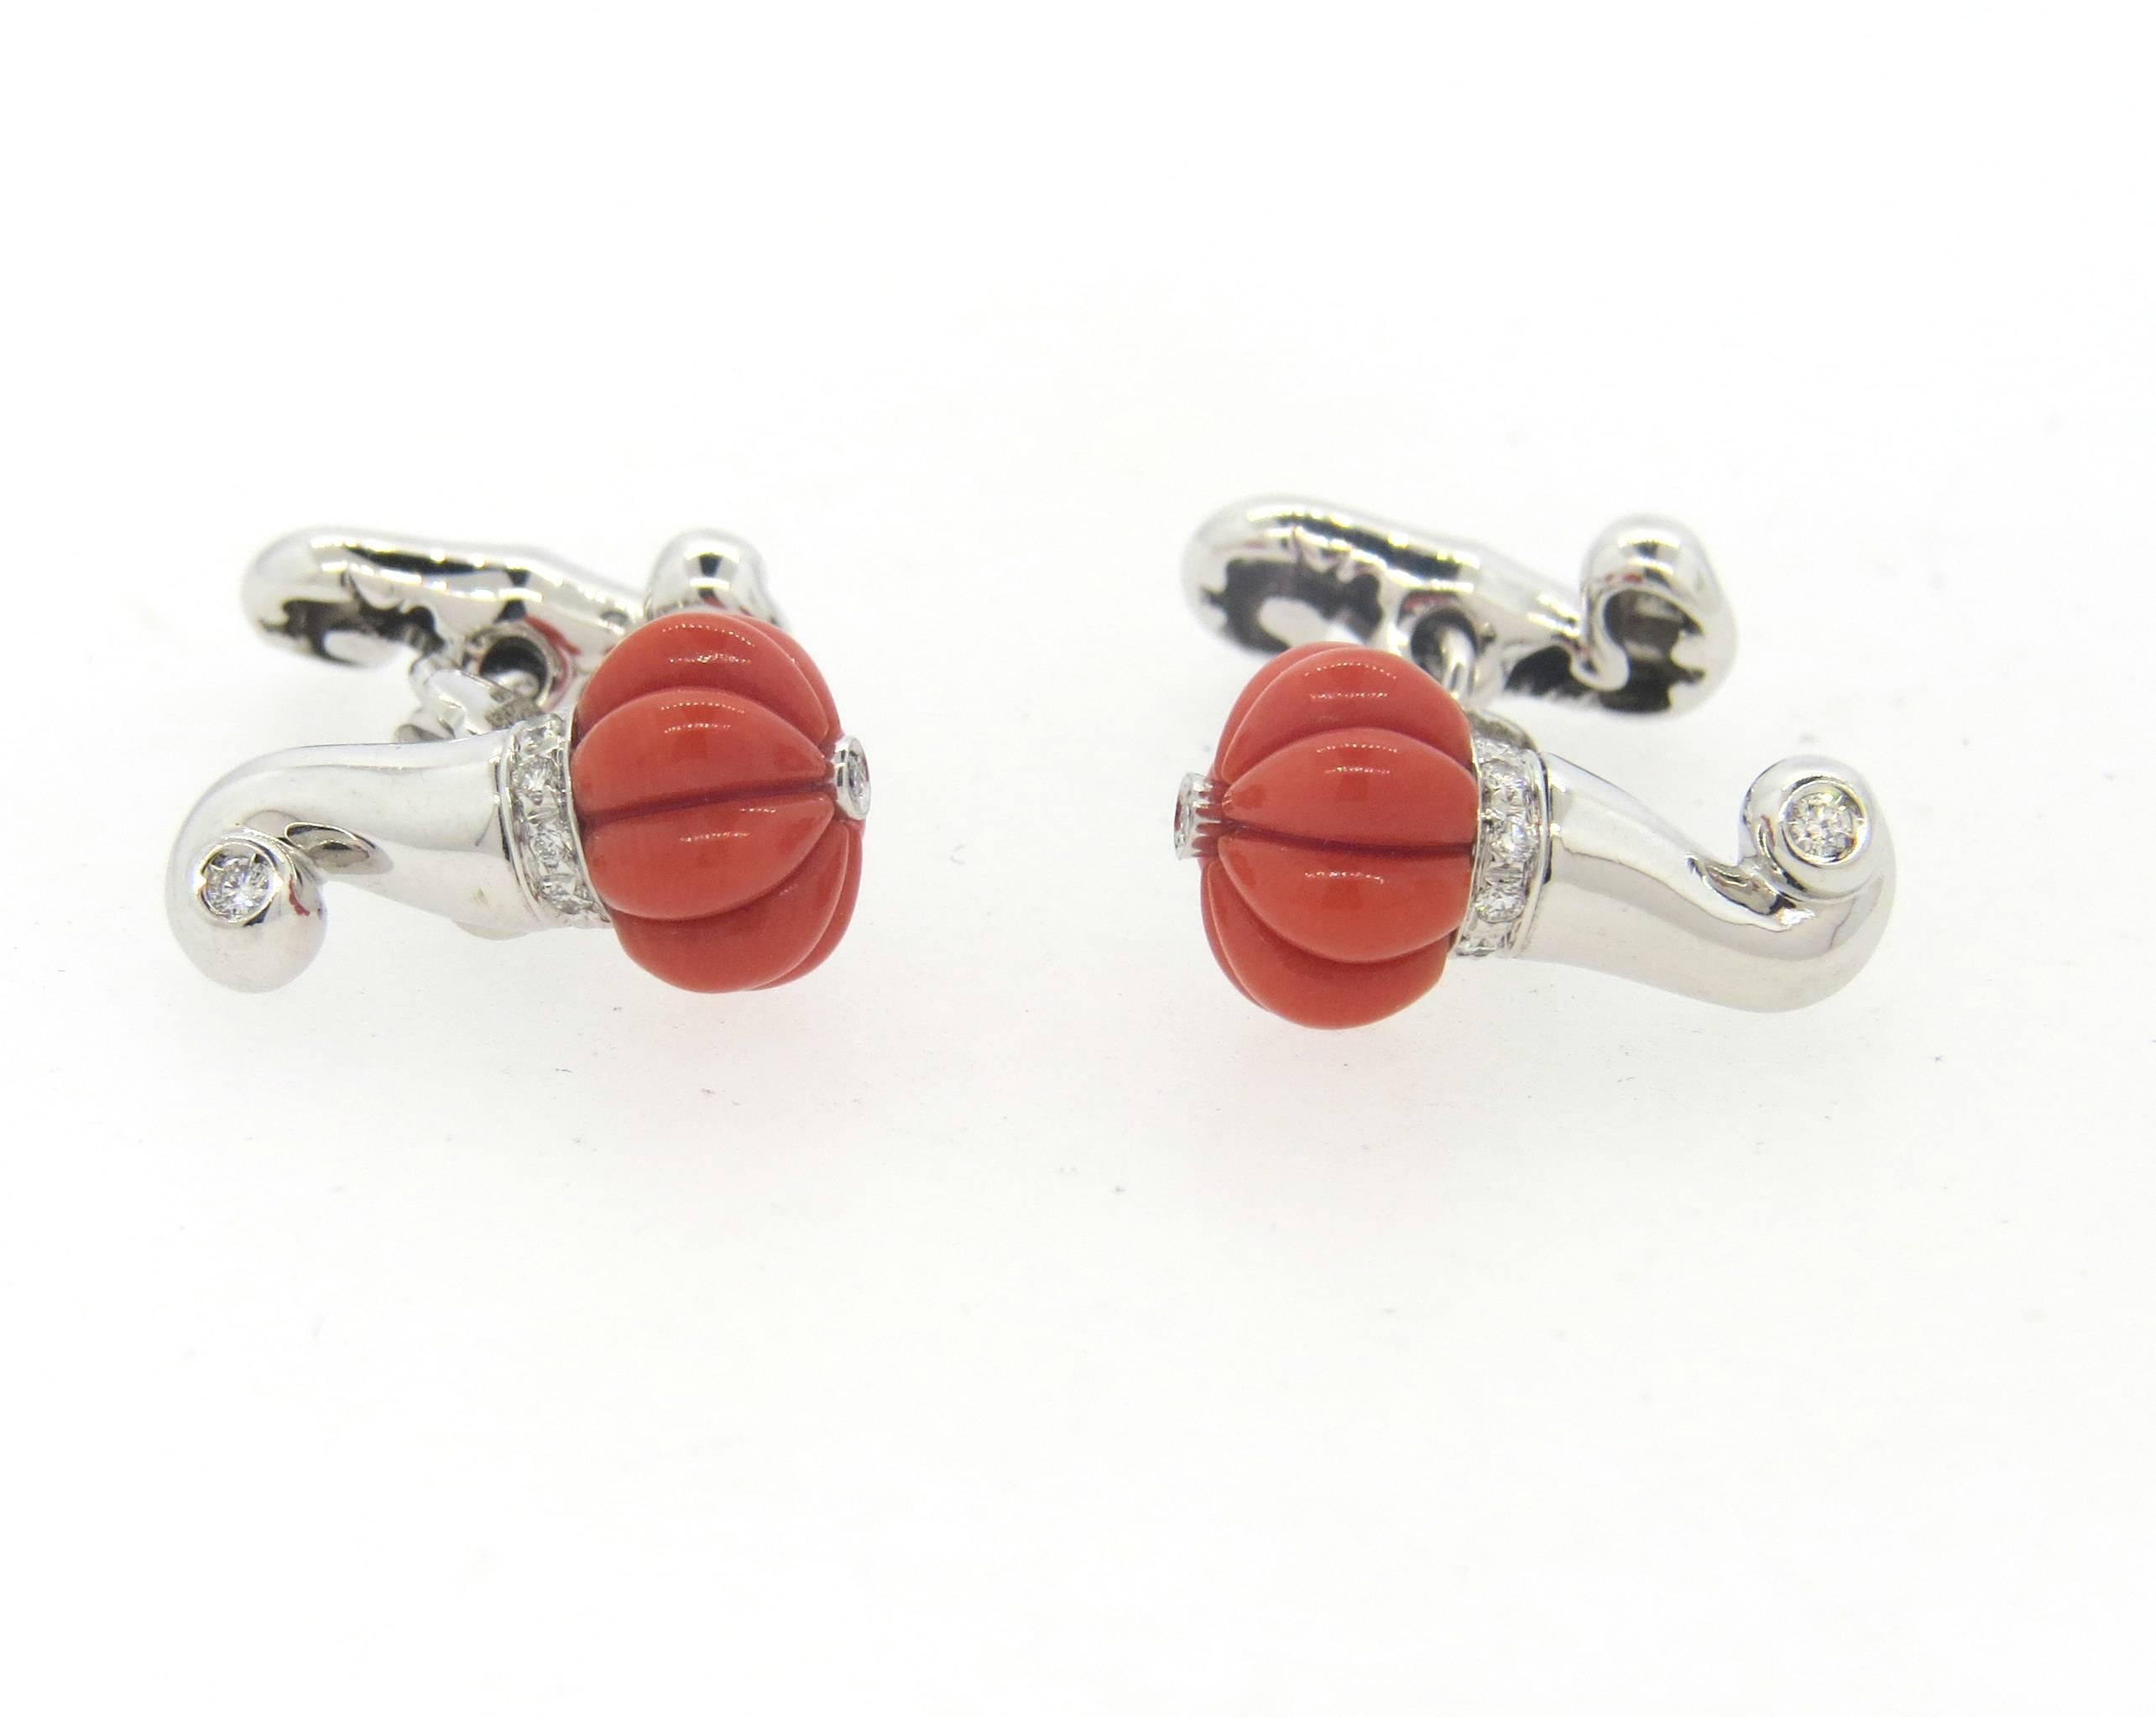 A pair of 18k white gold cufflinks, crafted by Chantecler, featuring carved coral tops, decorated with approximately 0.15ctw in diamonds. Cufflink top measures 18mm x 10mm, back - 15mm x 5mm. Marked: Italy, 18kt,1058MA, 750, Chantecler coral. Weight